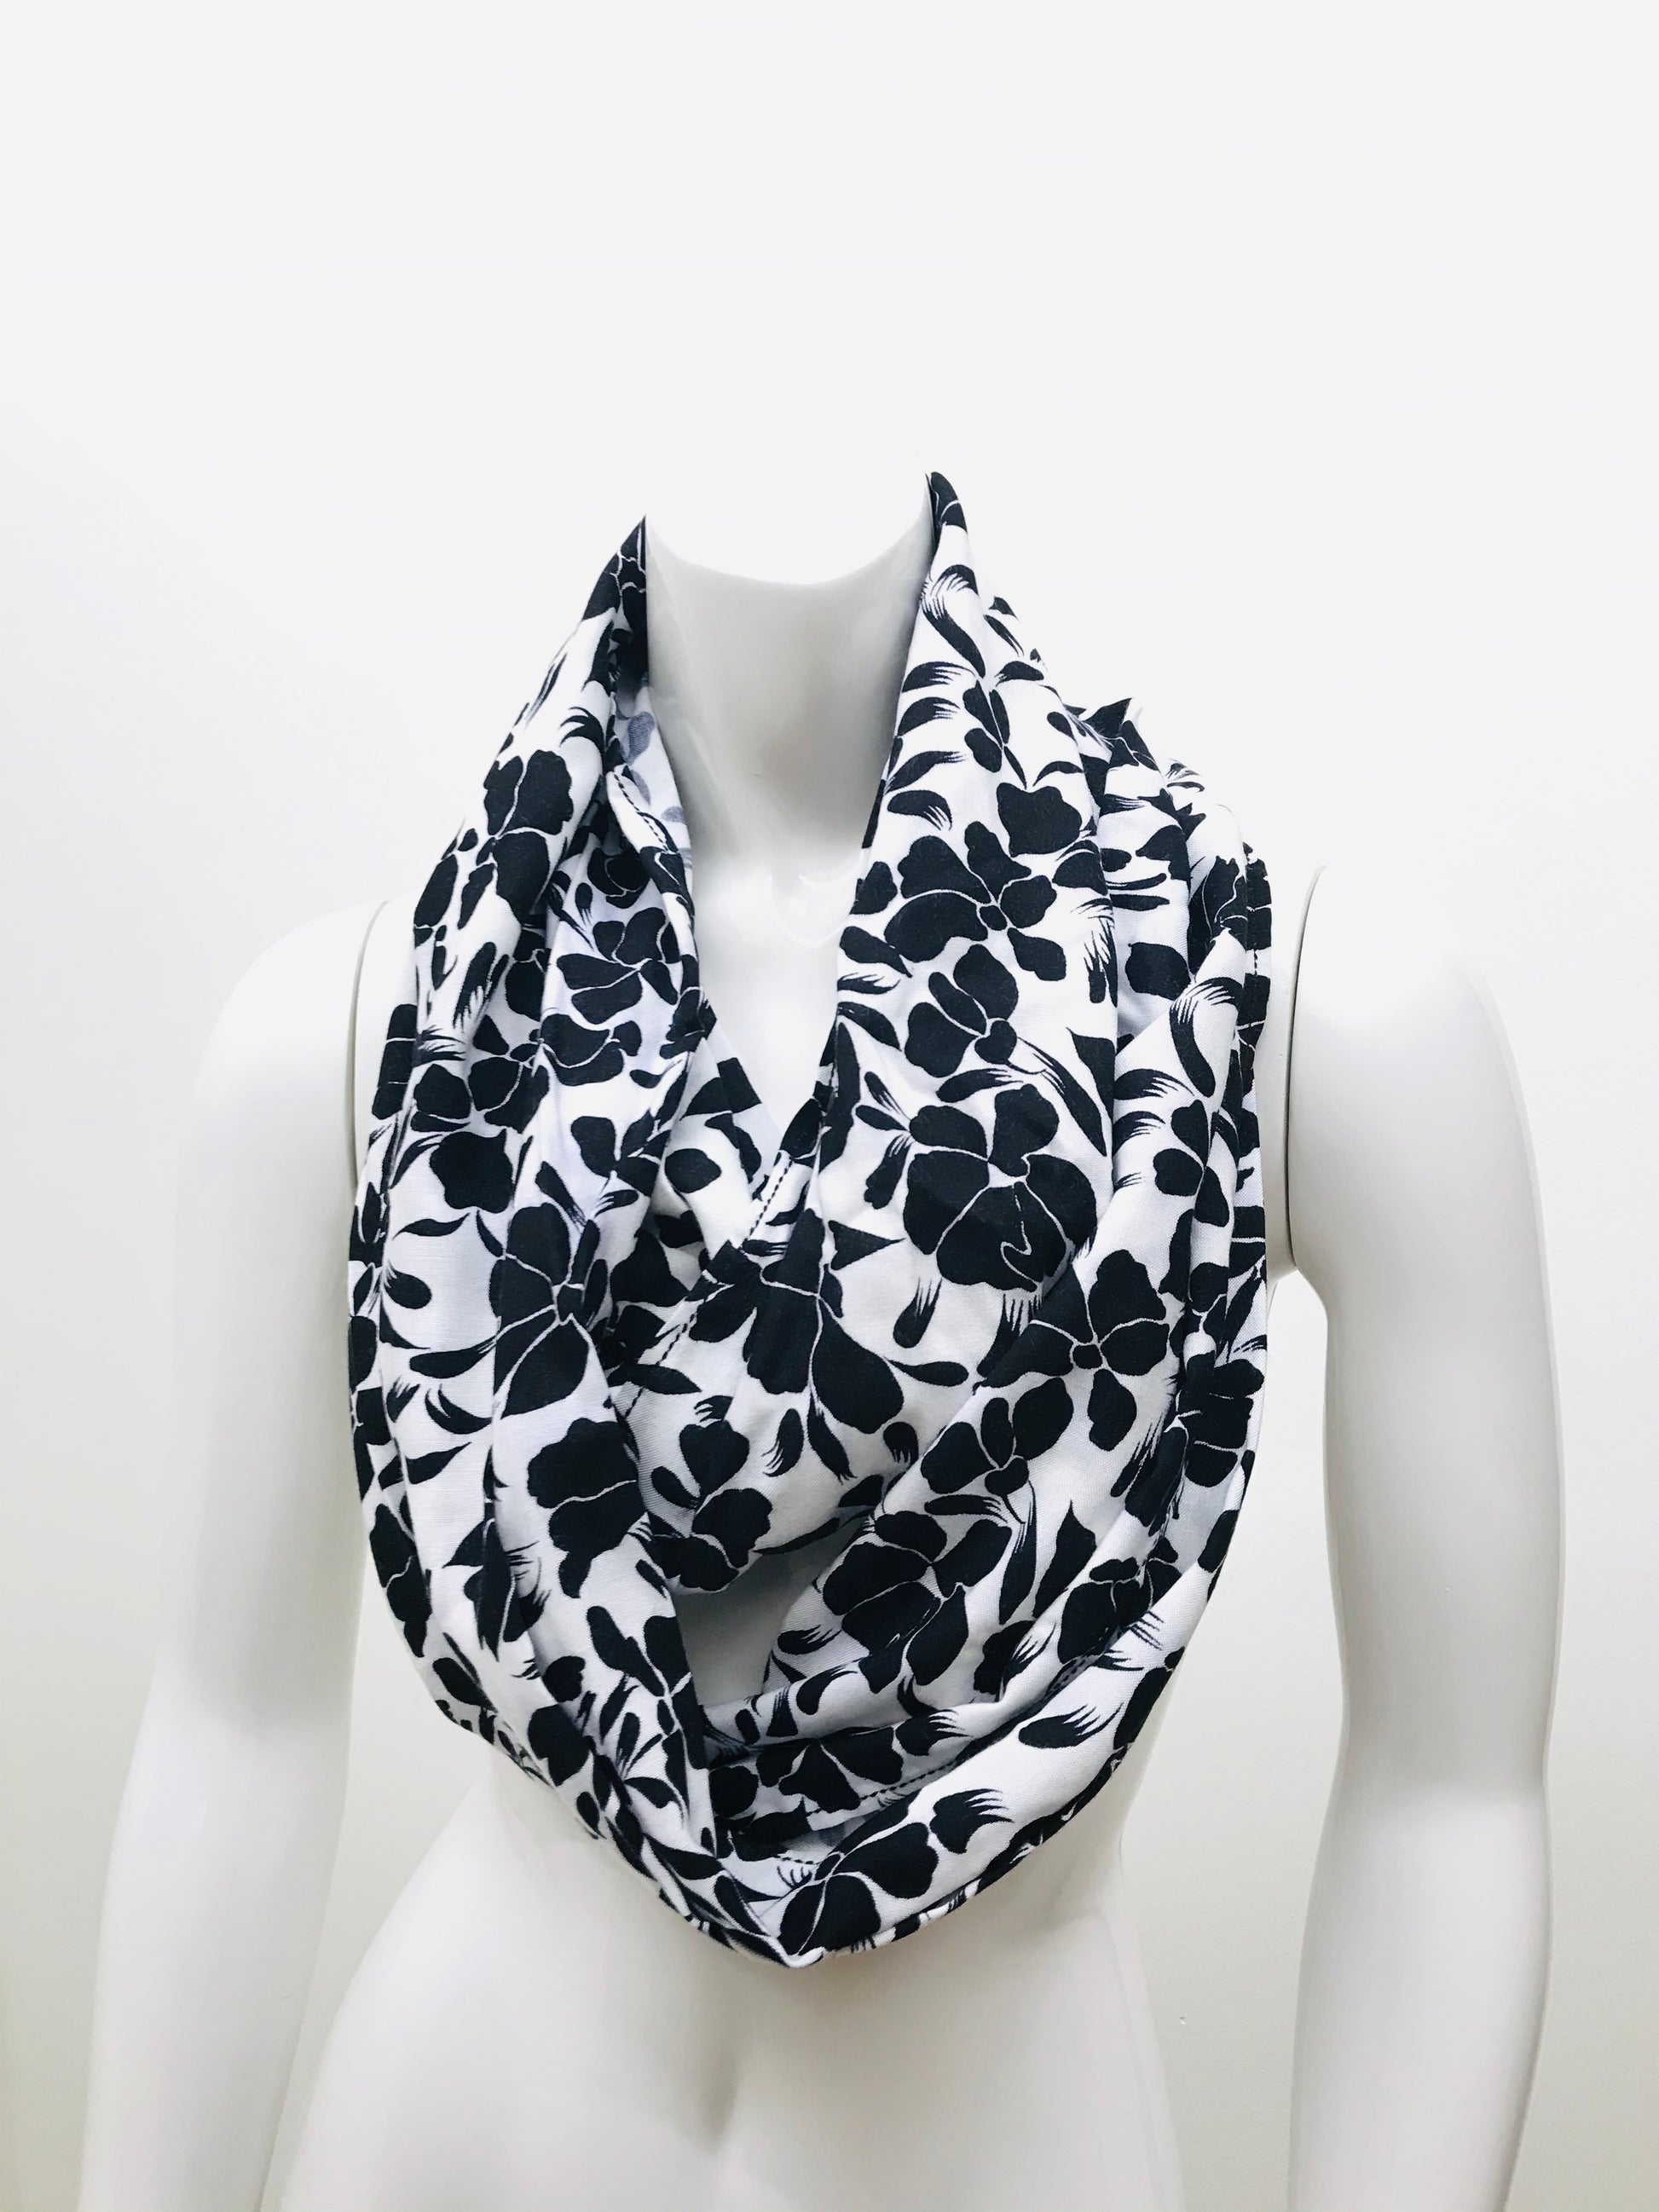 Turn your infinity scarf into a support for your meditation practice, quick snap and adjust to align the spine and sit in comfort. Created by My Yoga Room Elements and produced in Canada. Black and white floral print